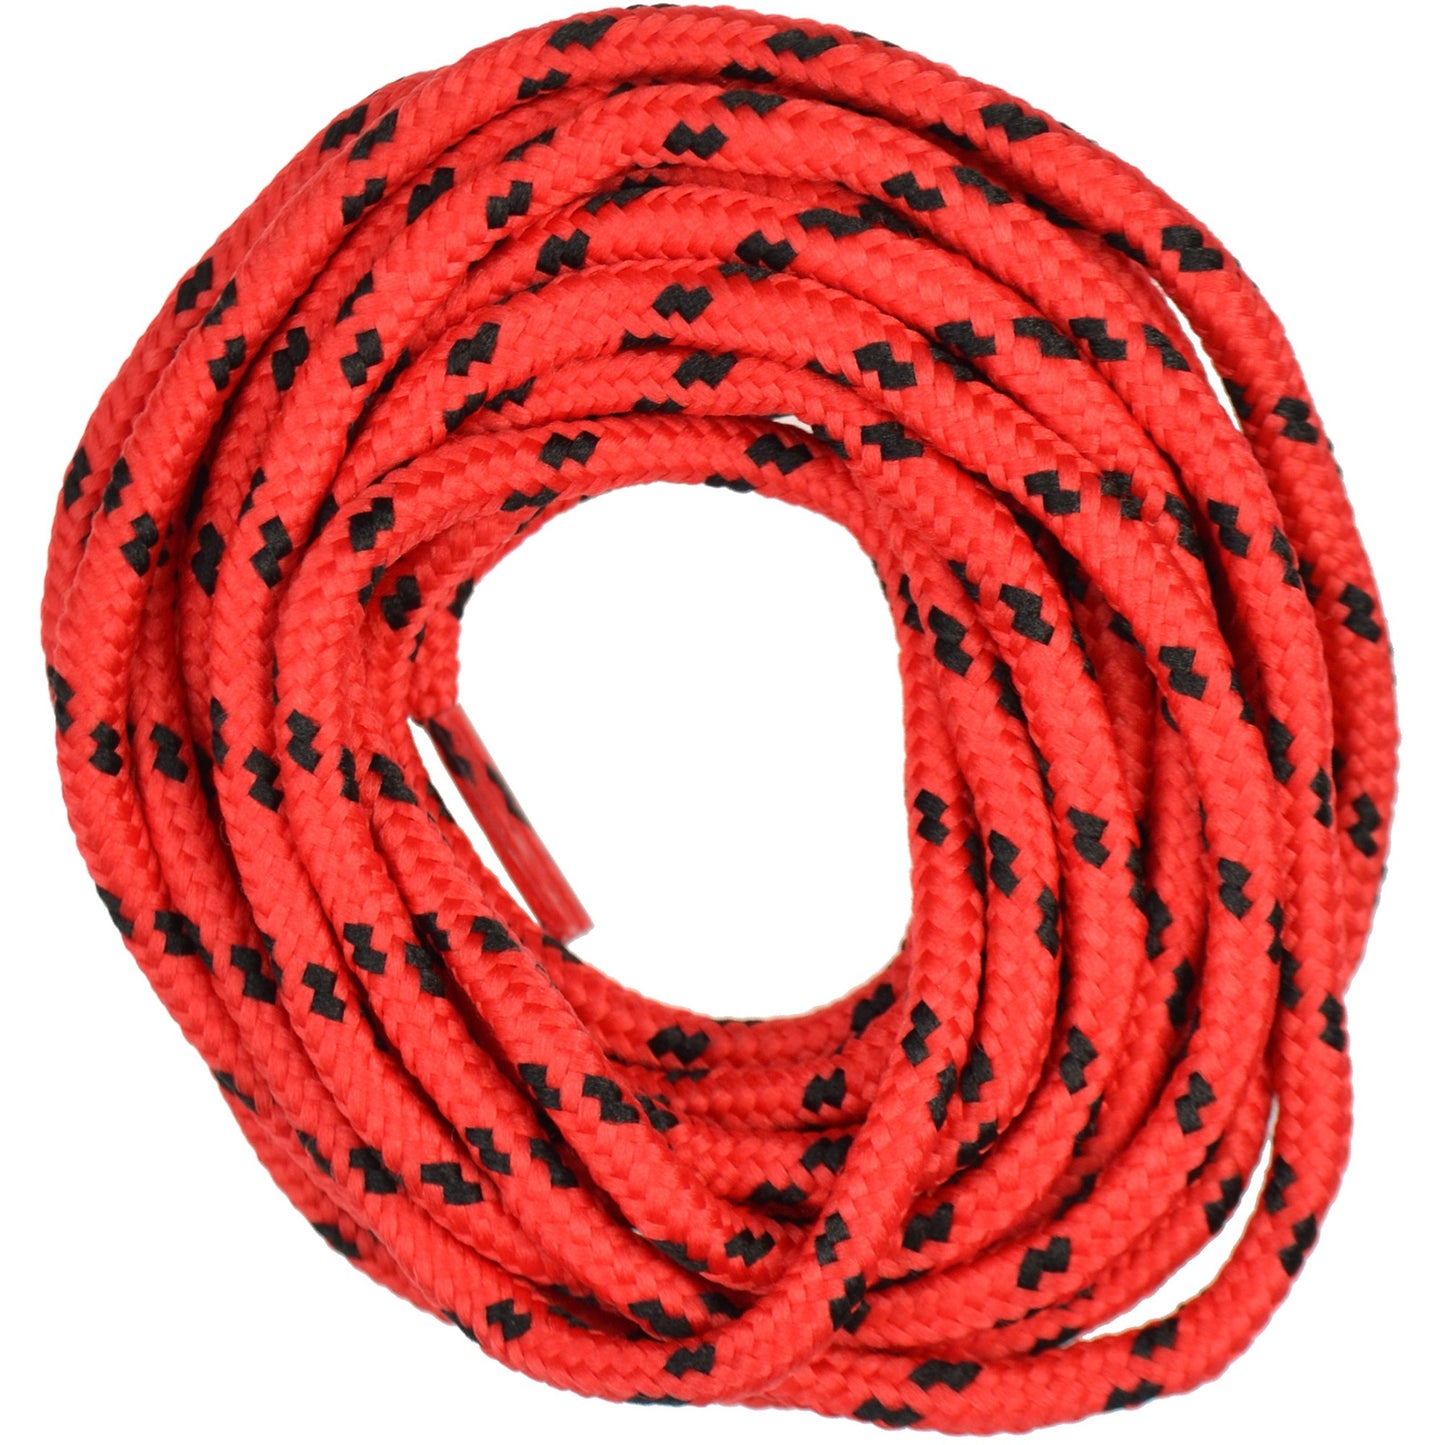 150cm Red with black flecks walking boot Shoe Laces